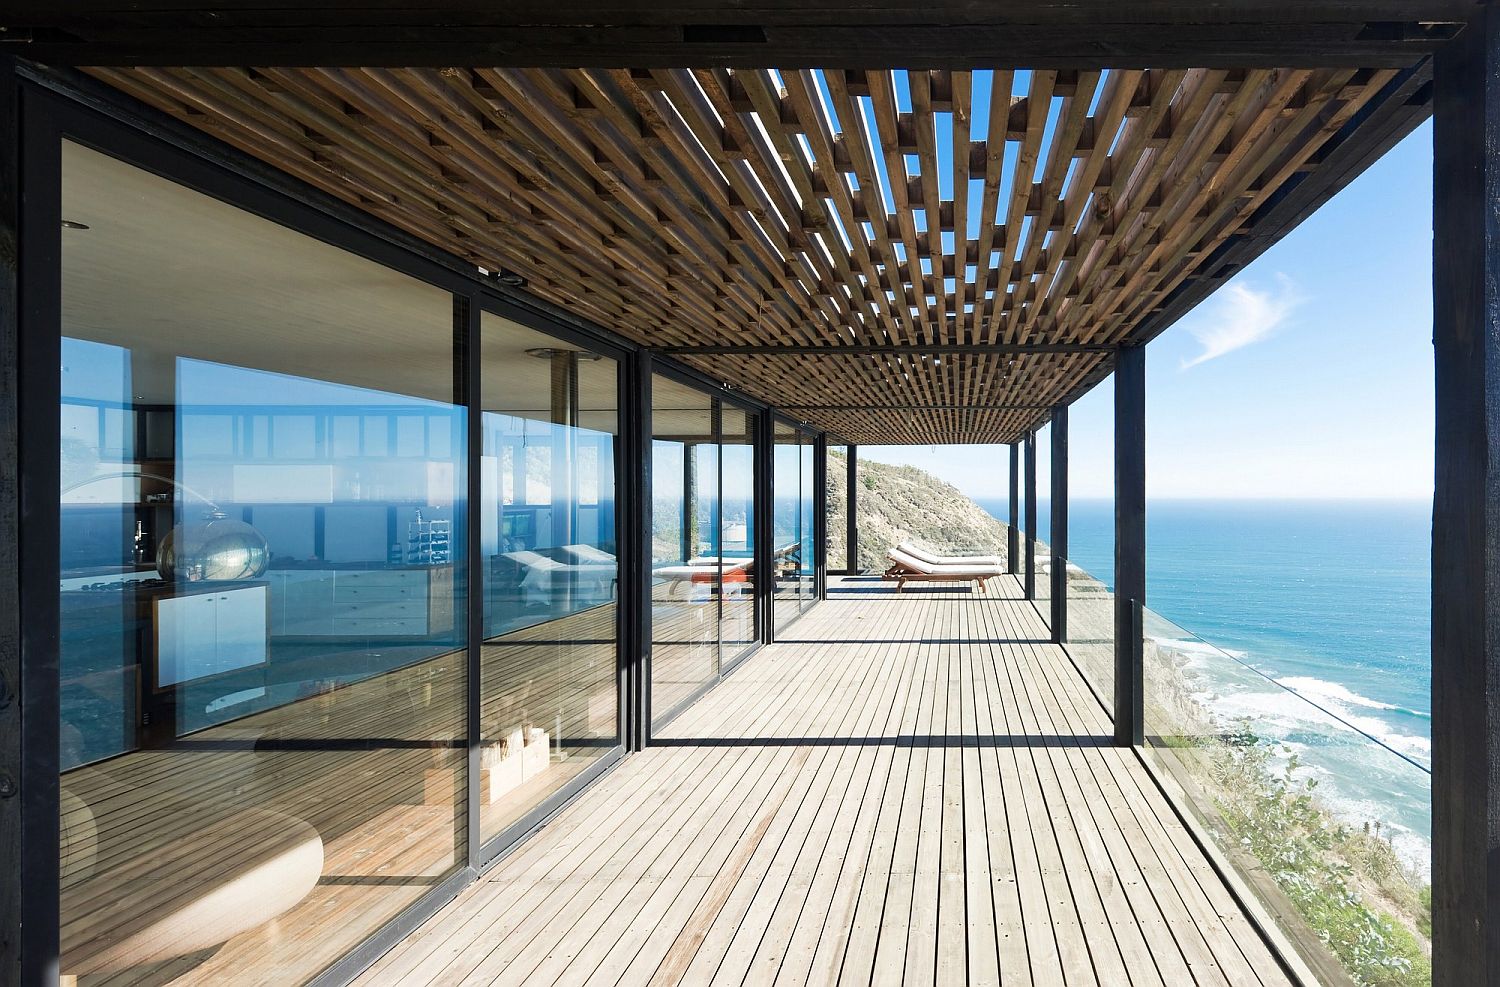 Open-deck-outside-the-house-offers-amazing-views-of-the-coastline